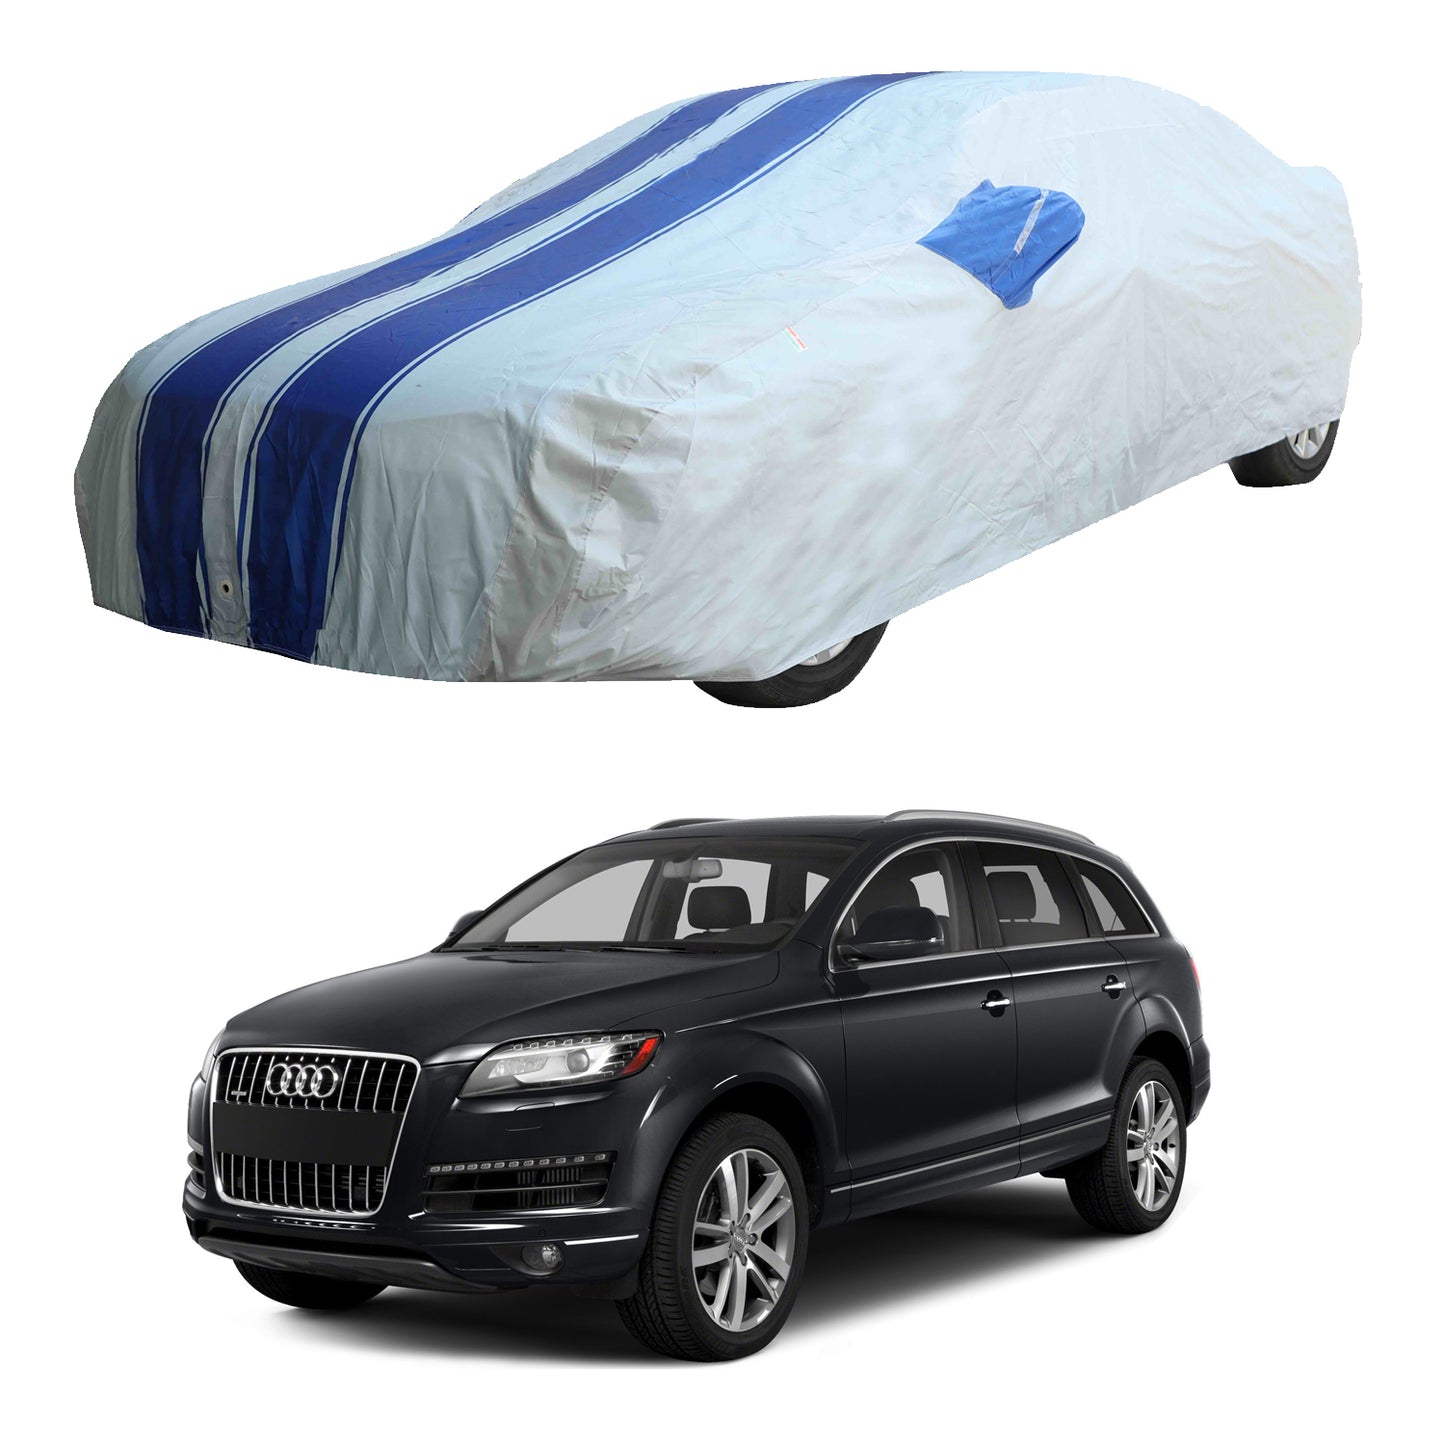 Oshotto 100% Blue dustproof and Water Resistant Car Body Cover with Mirror Pockets For Audi Q7 (2008-2017)